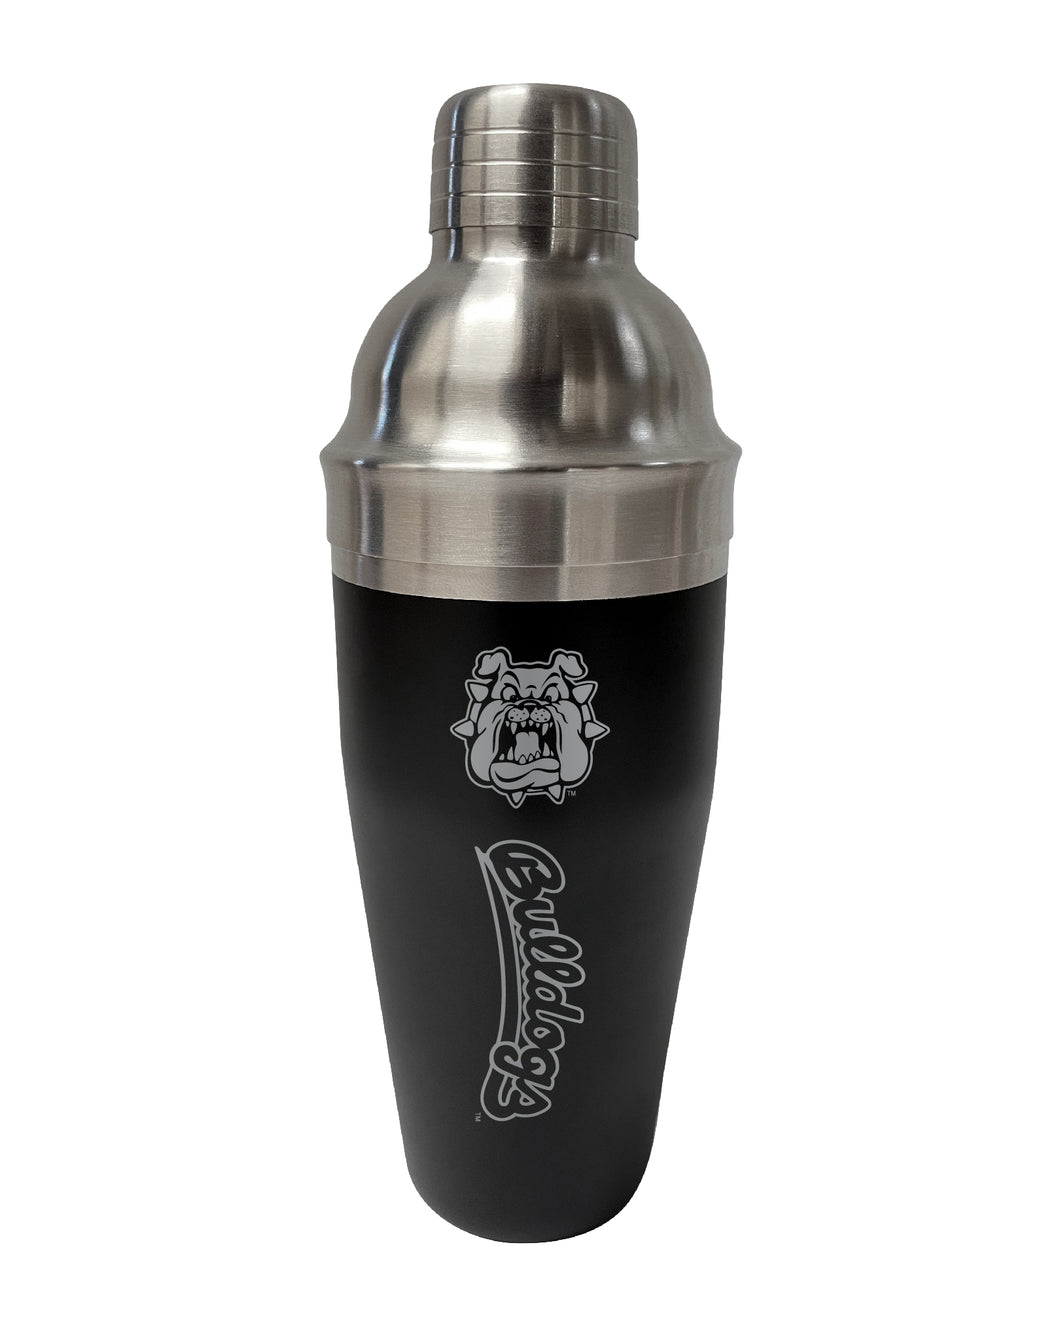 Fresno State Bulldogs NCAA Official 24 oz Engraved Stainless Steel Cocktail Shaker | College Team Spirit Drink Mixer